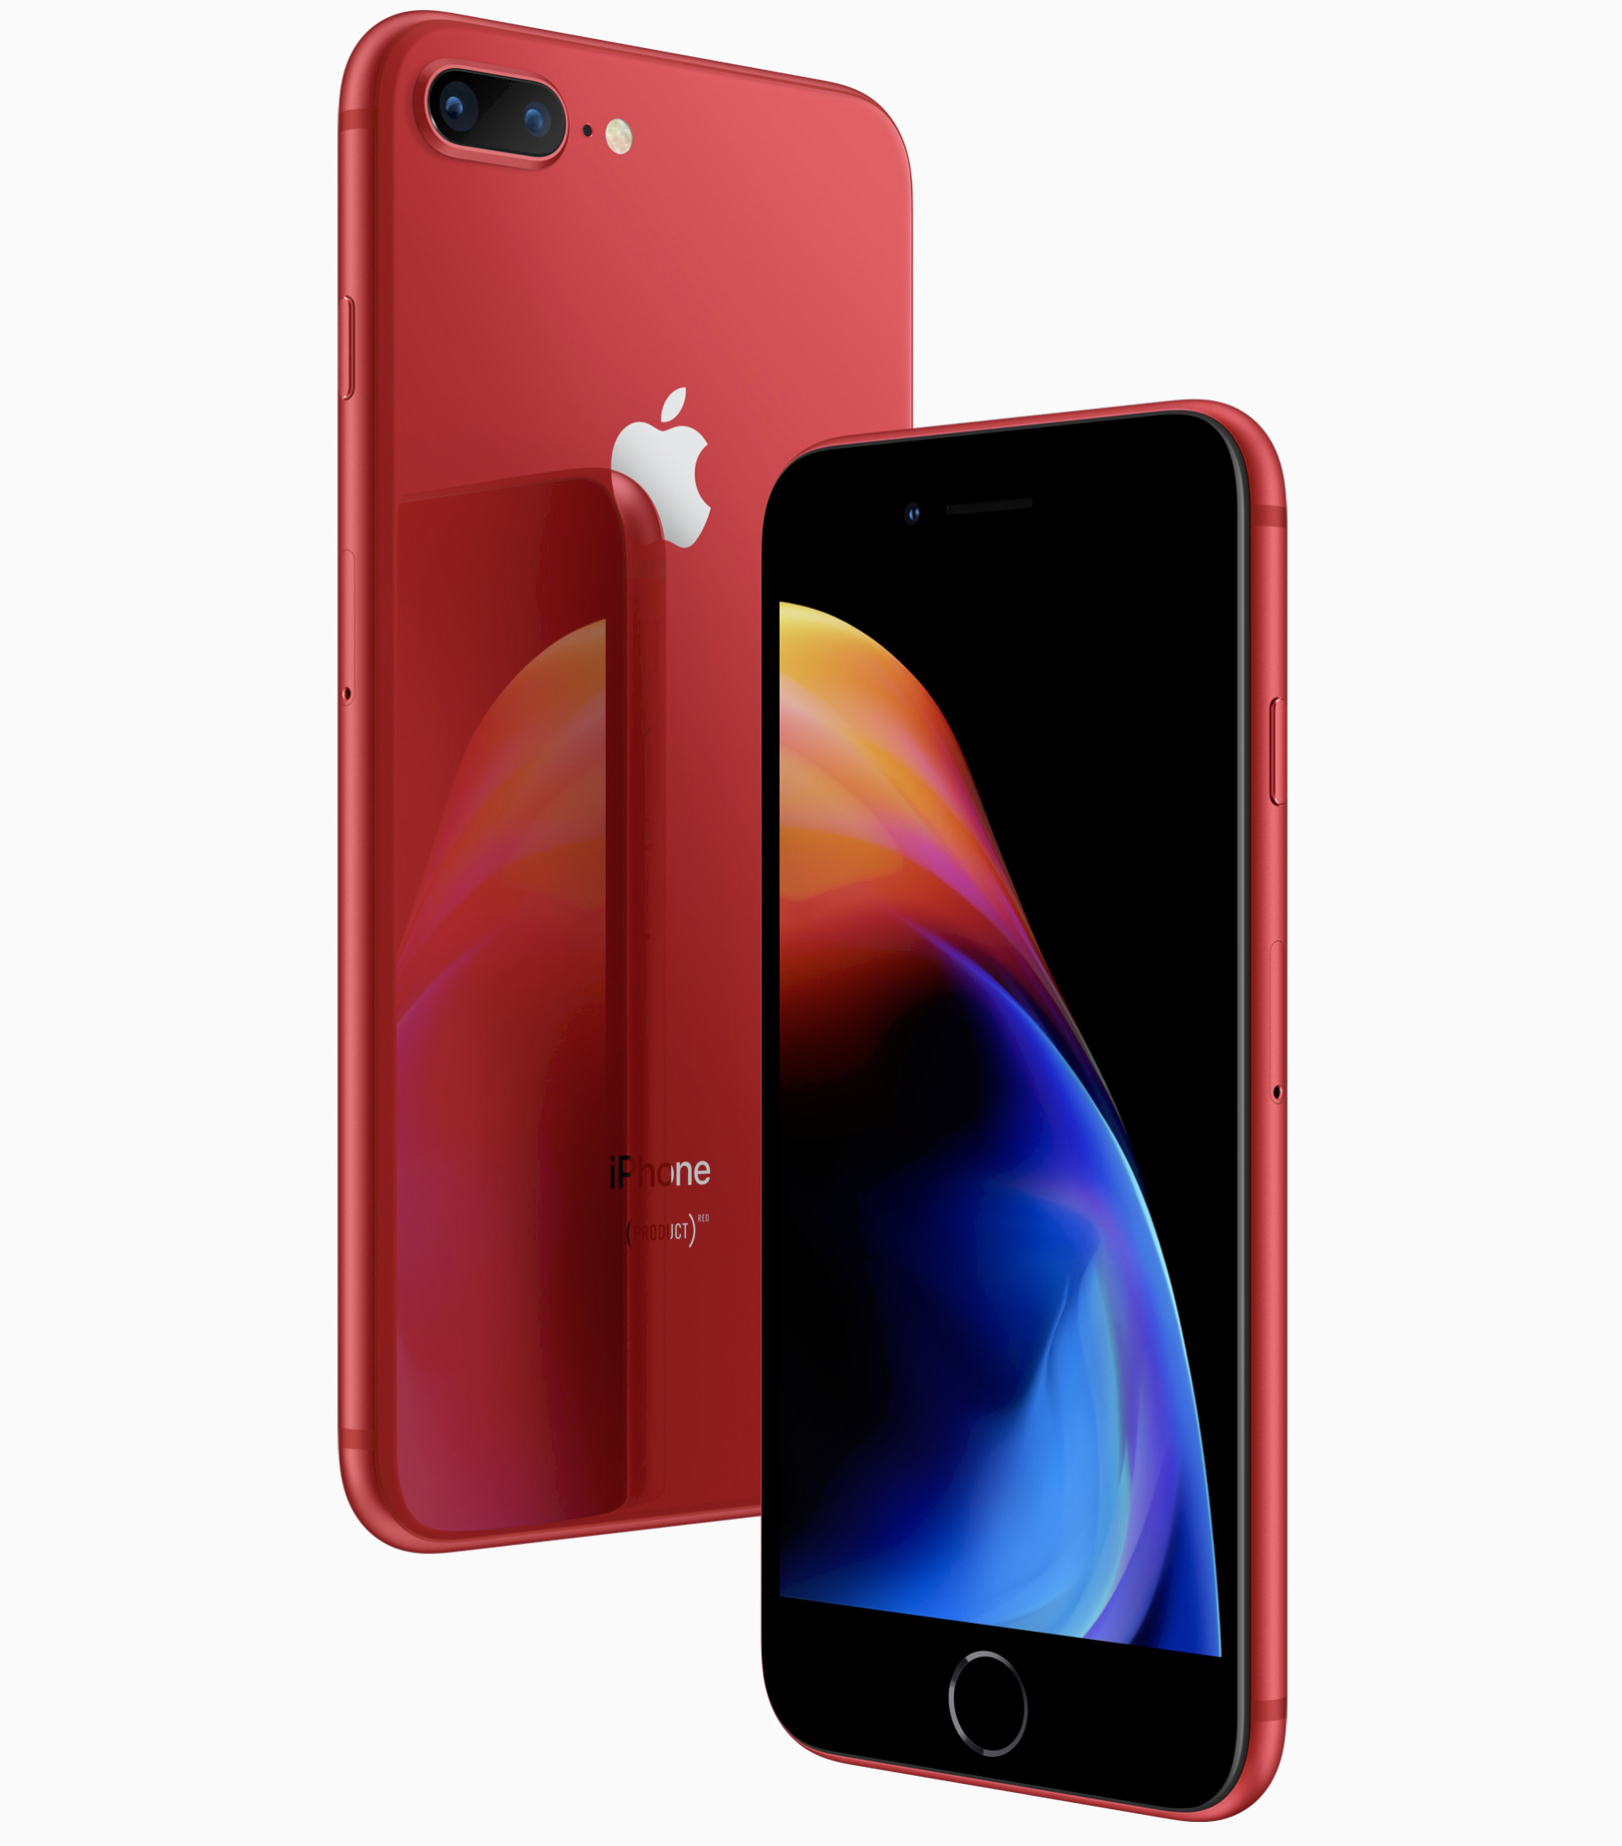 apple-unveils-limited-edition-red-iphone-8-and-iphone-8-plus-available